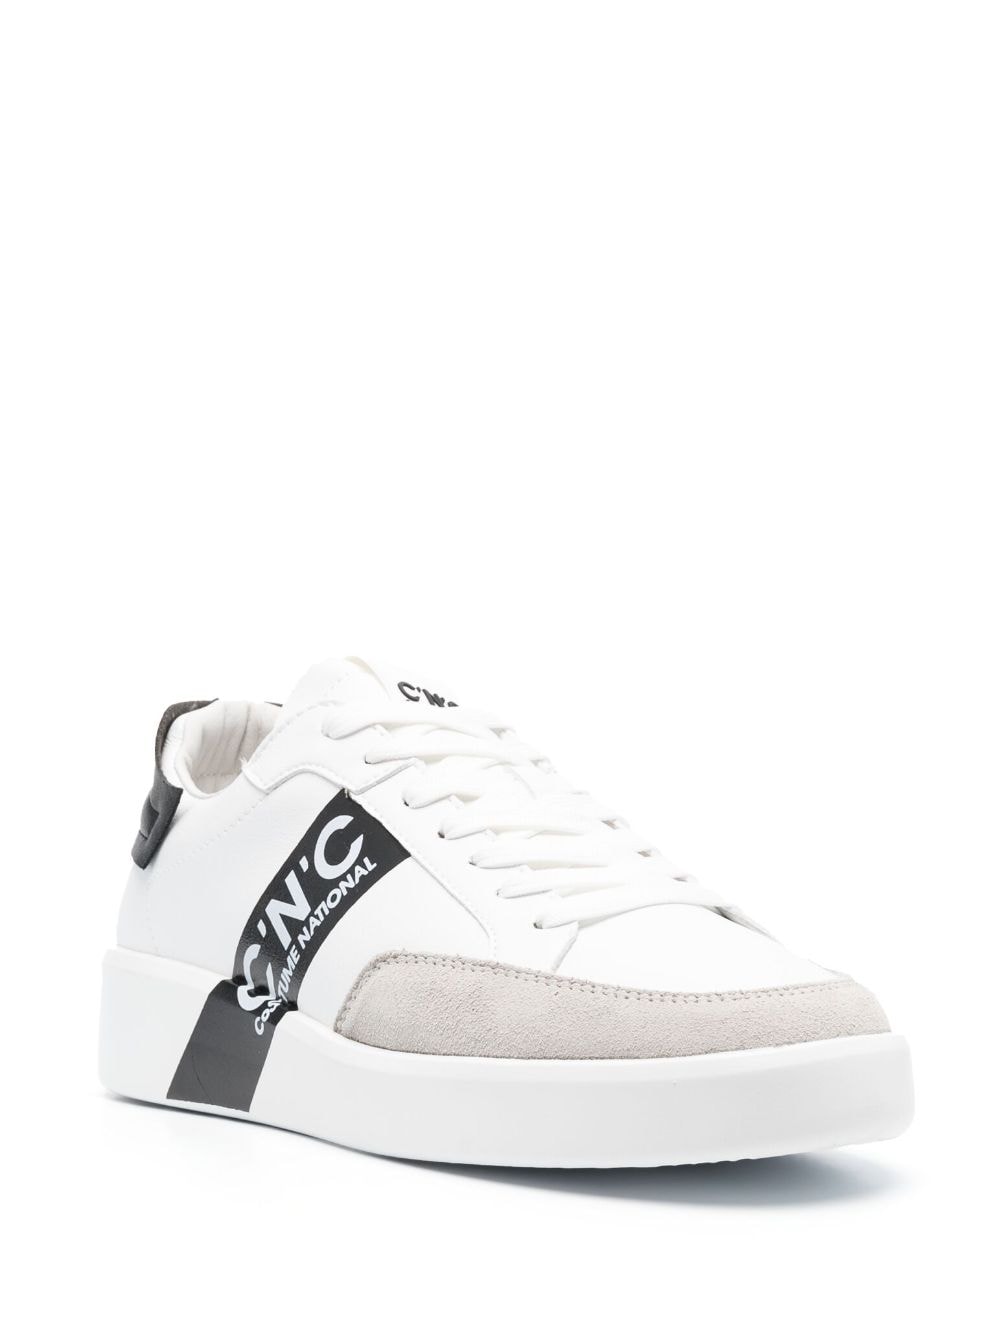 Costume National Contemporary low-top Leather Sneakers - Farfetch